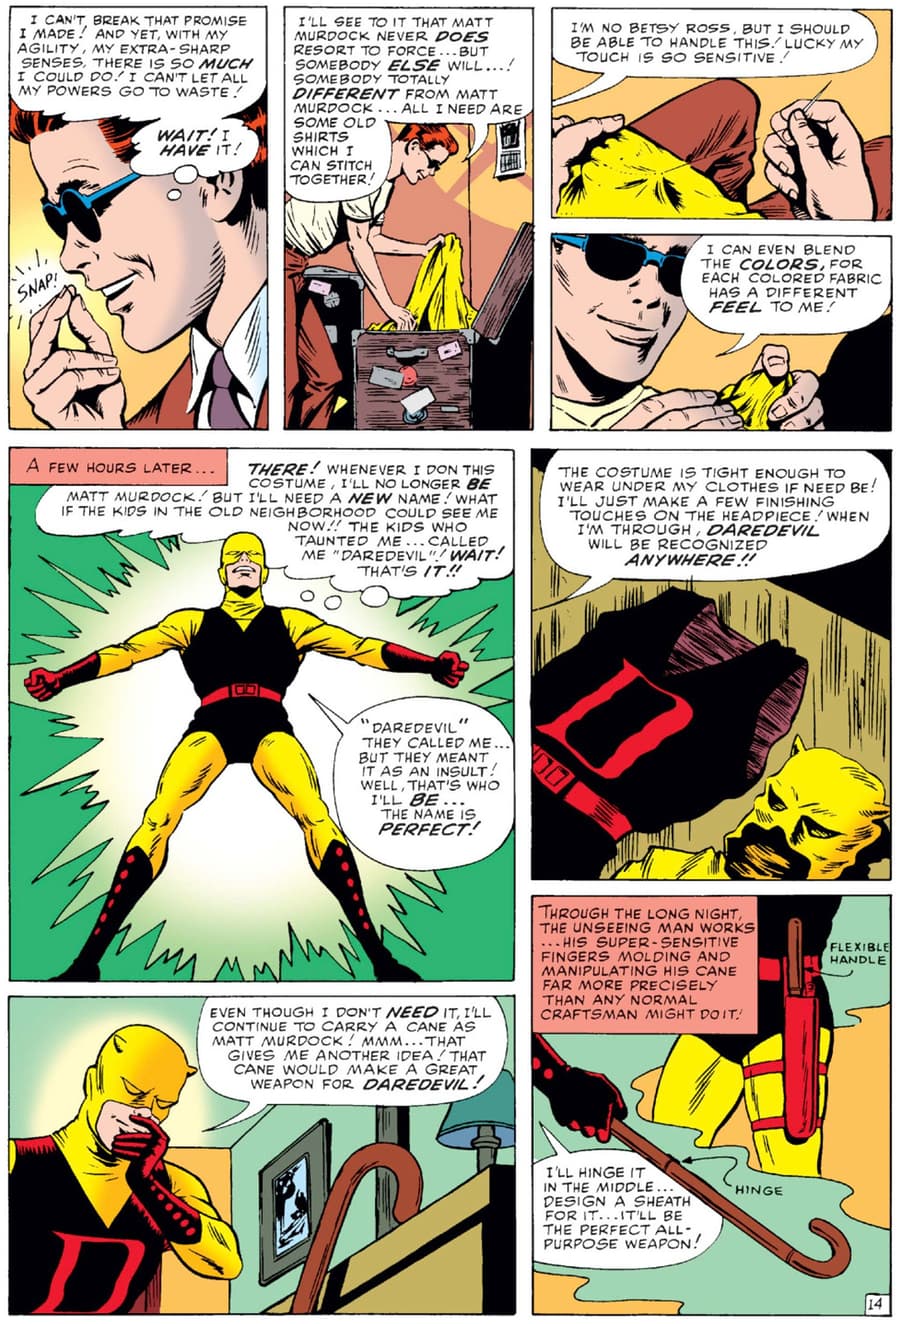 DAREDEVIL (1964) #1 page by Stan Lee and Bill Everett